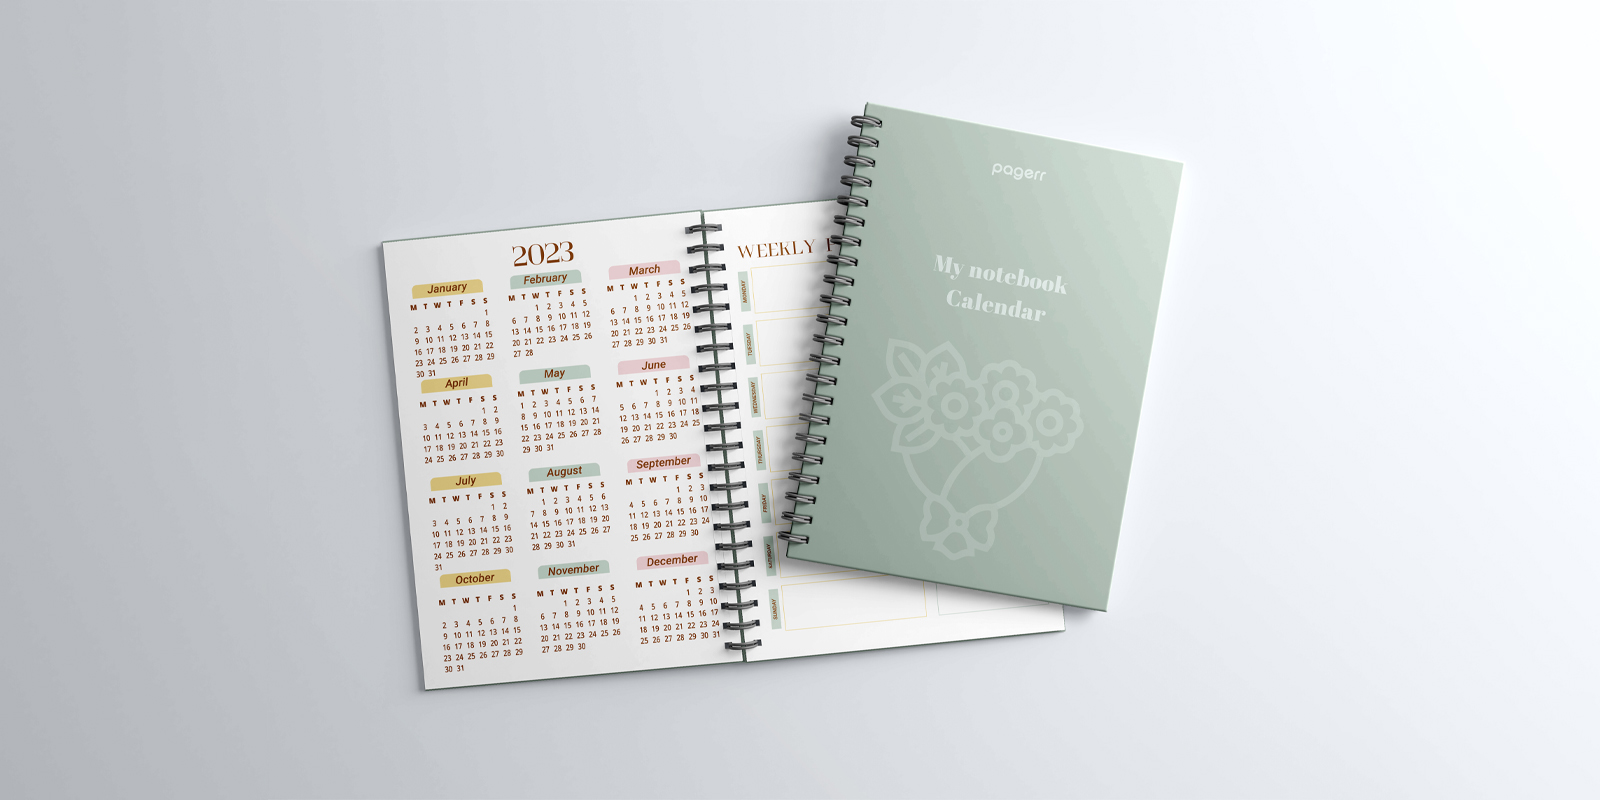 Notebook calendars in Cairns - Print with Pagerr